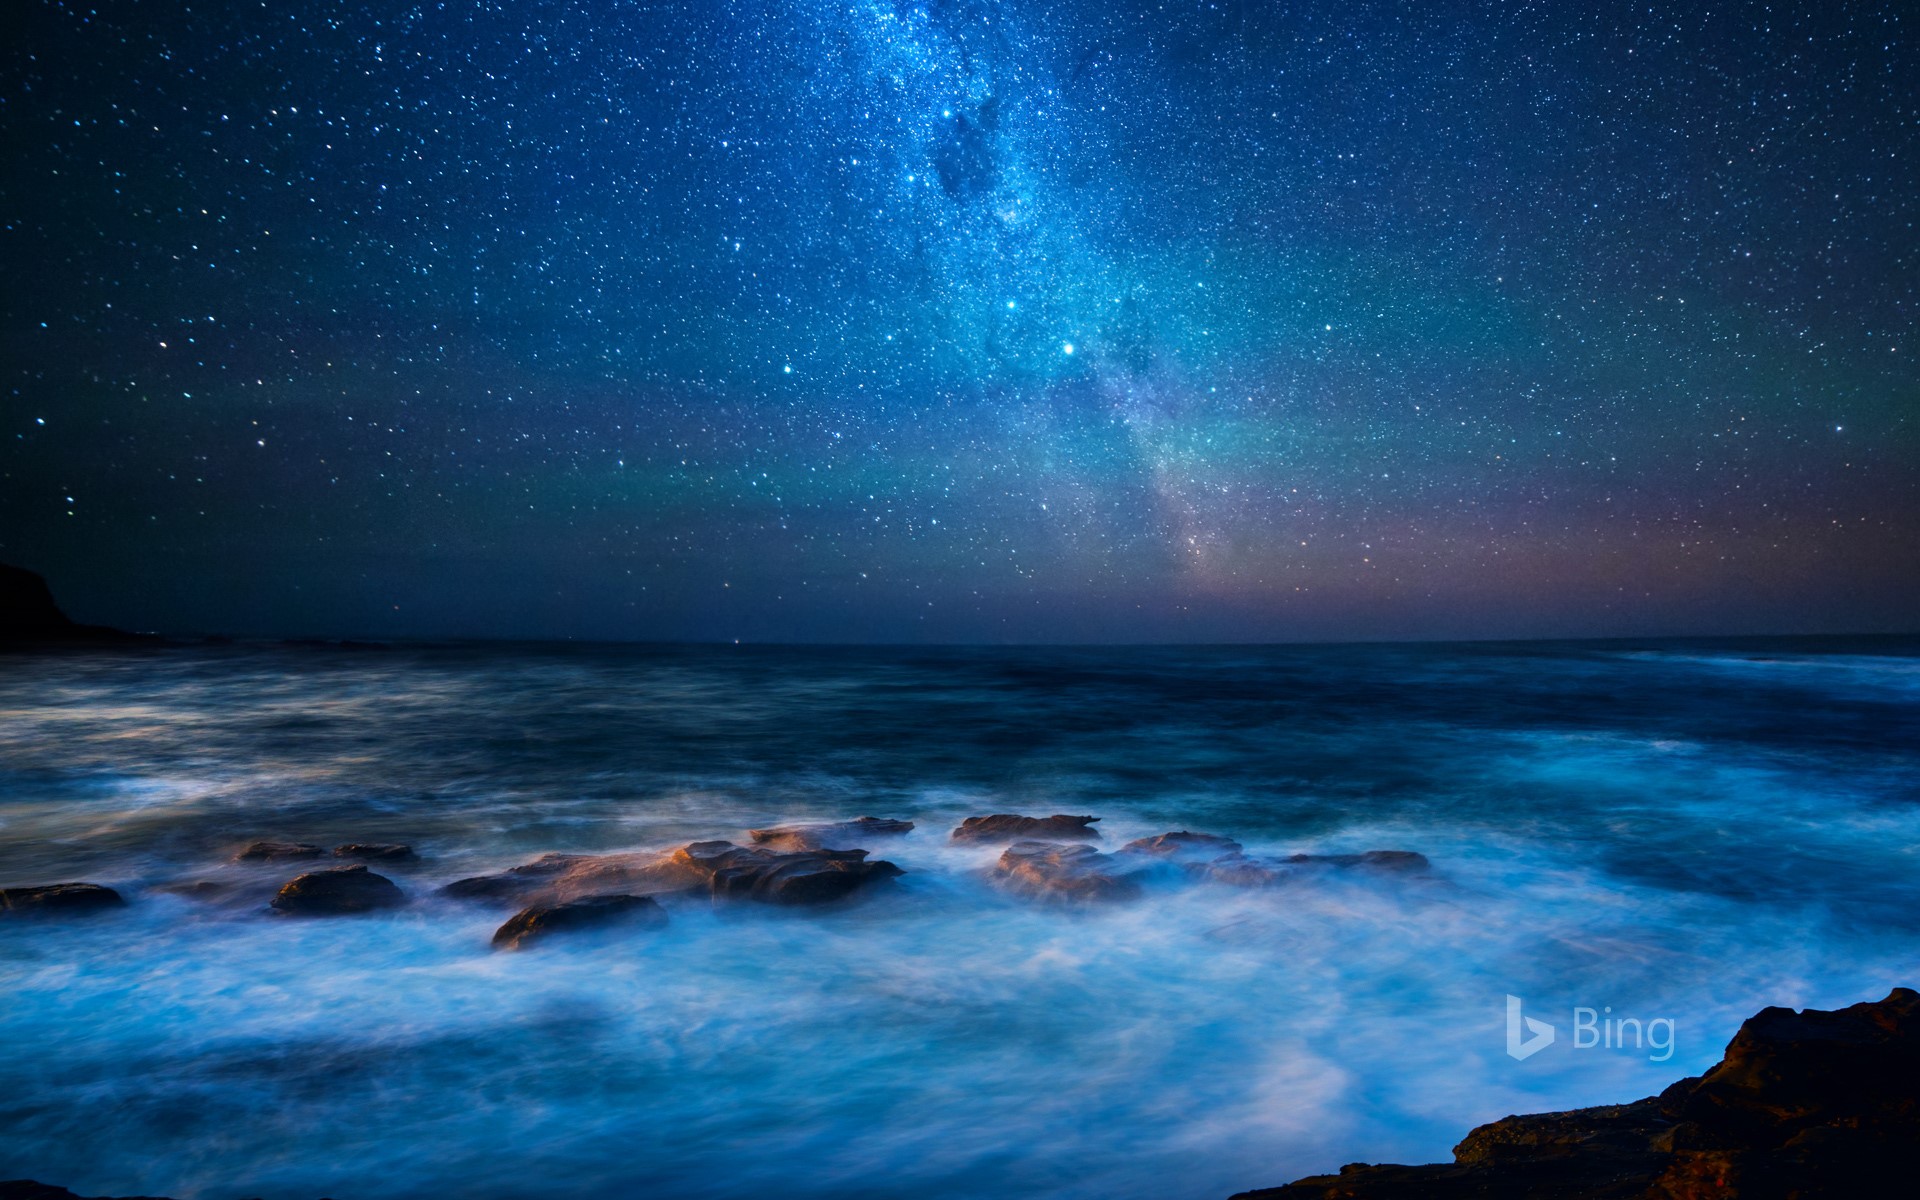 View of the Milky Way from the Great Ocean Road, Victoria, Australia